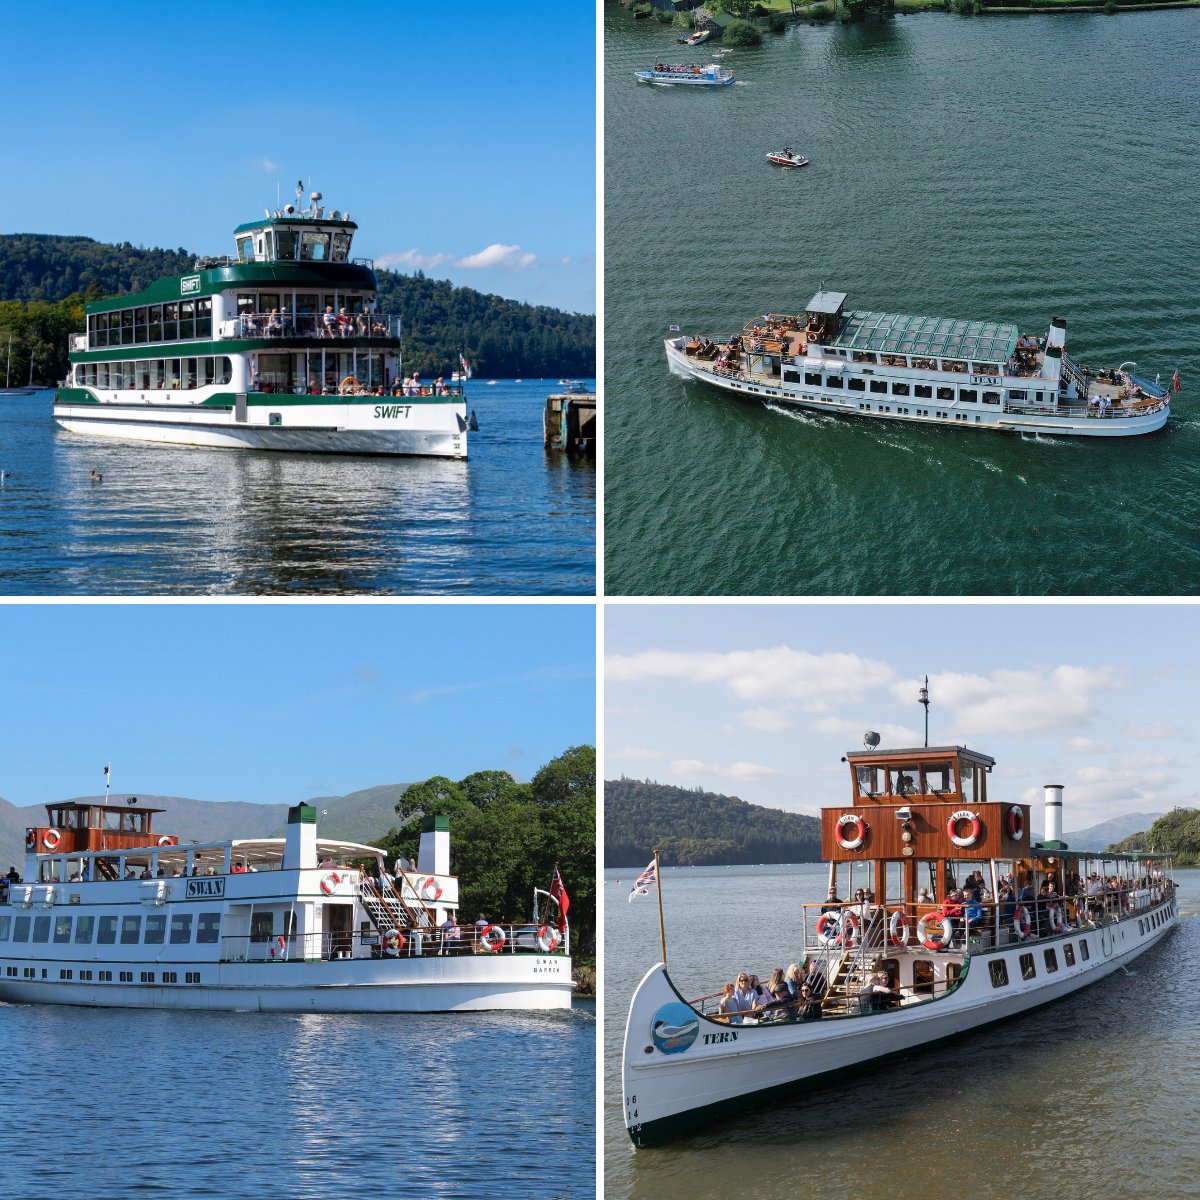 Want to explore the water but have concerns about #accessibility?♿️ Our fleet has both modern and historic boats, some with better accessibility features than others. Check out our guide to pick the perfect cruise for you - ow.ly/3AbX50Rl5A4 #AccessibleTravel